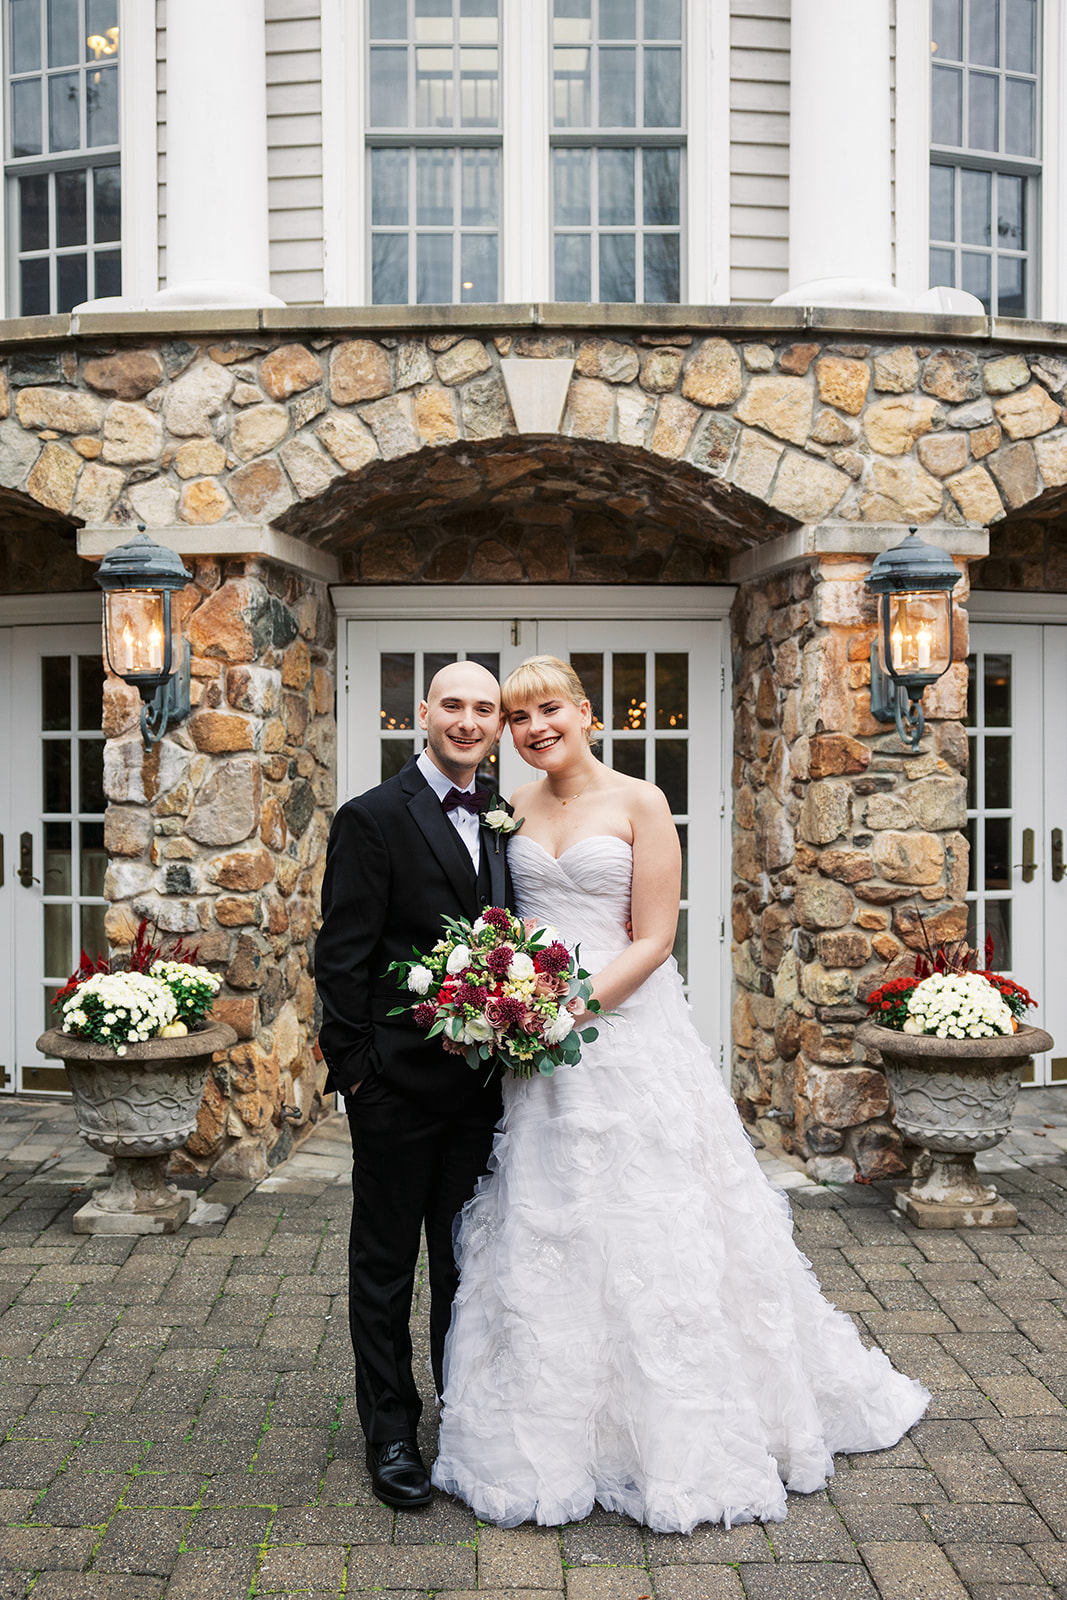 Newlyweds stand on a paved patio holding the colorful bouquet at an Olde Mill Inn Wedding